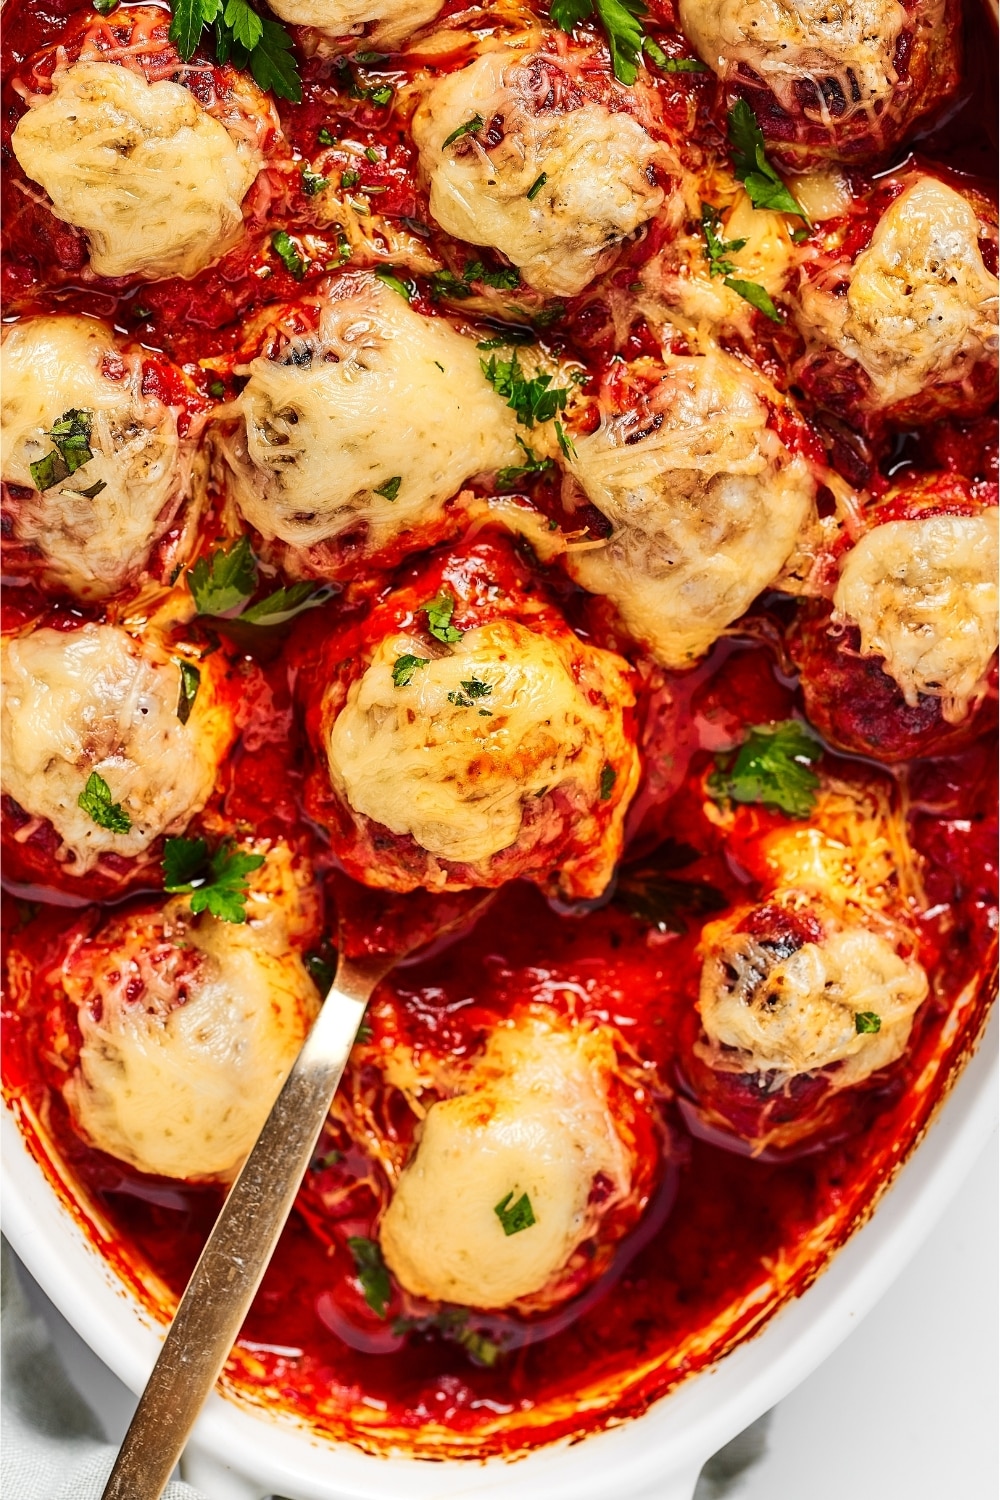 Part of the white baking dish filled with meatballs in tomato sauce with melted cheese on top.